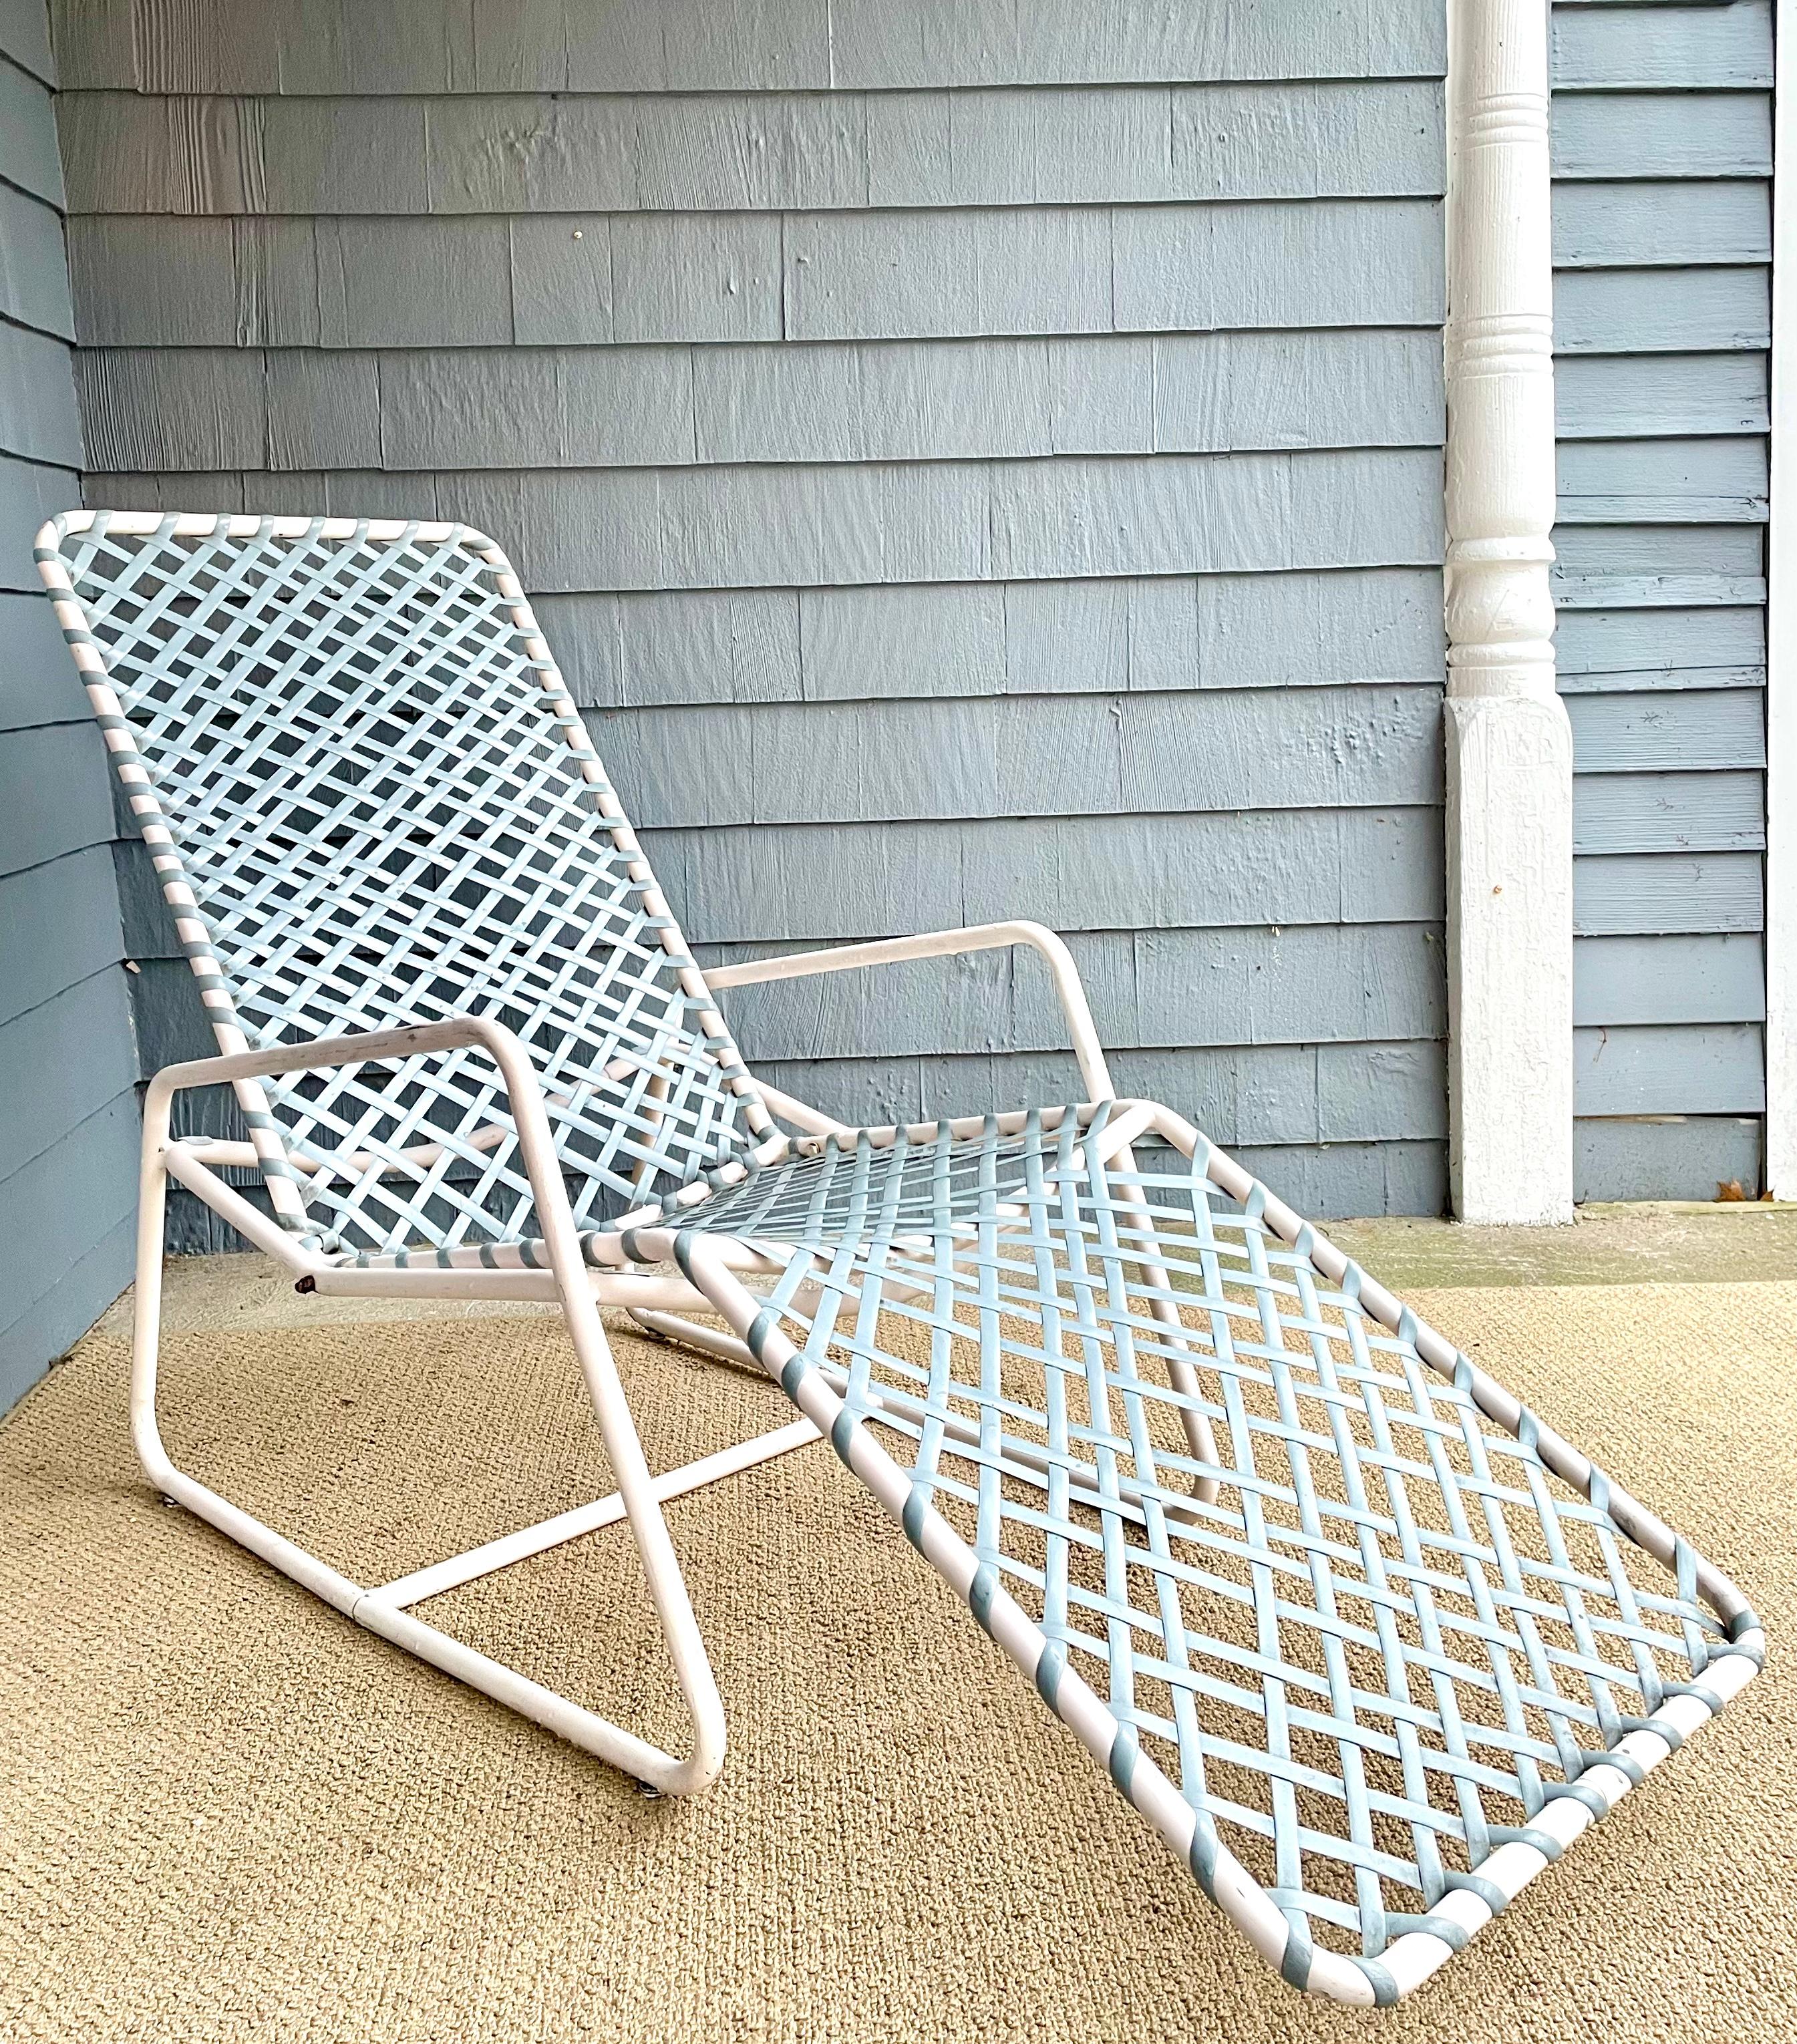 20th Century Vintage Brown Jordan Outdoor Patio Chaise Lounge For Sale